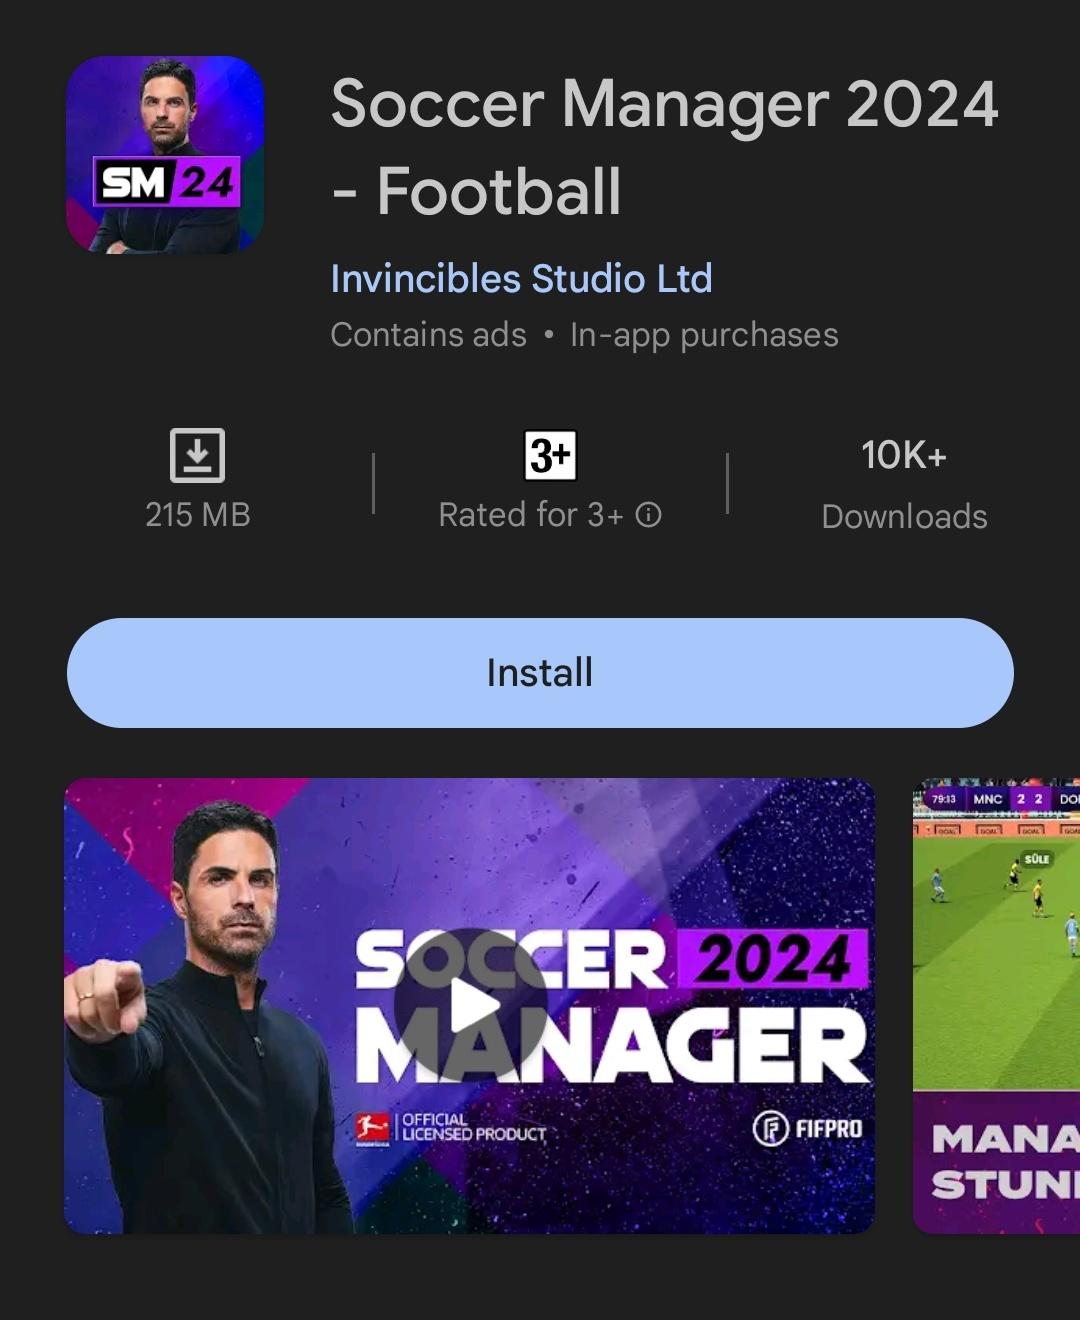 Soccermanager.com - Is Soccer Manager Down Right Now?